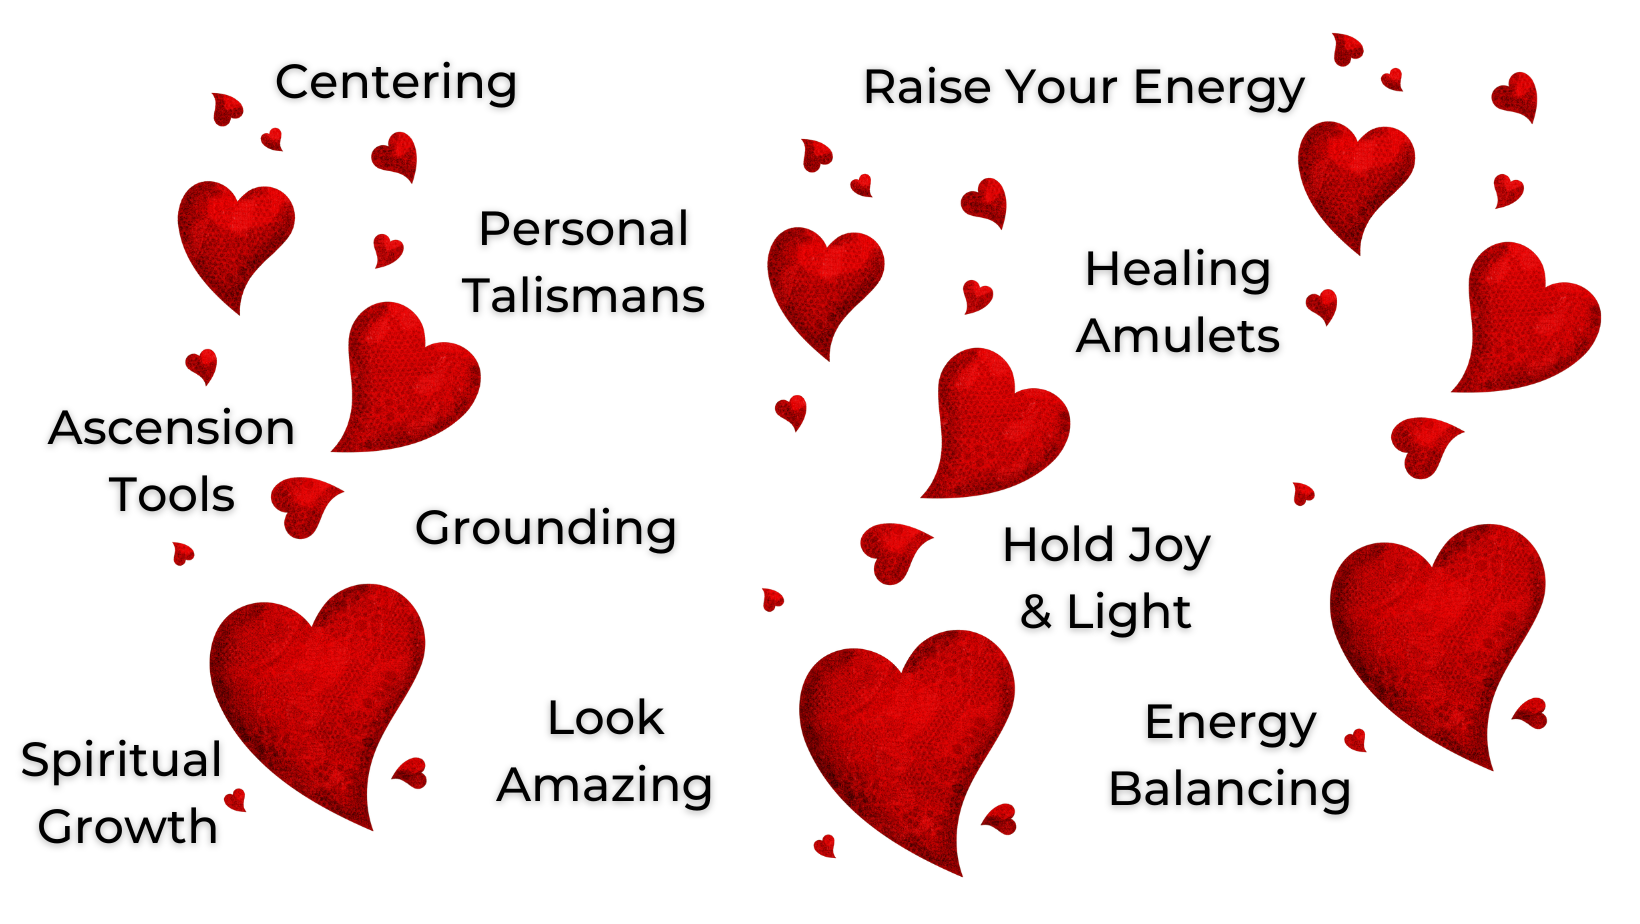 Centering, Raise Your Energy, Personal Talismans, Healing Amulets, Ascension Tools, Grounding, Hold Joy & Light, Spiritual Growth, Look Amazing, Energy Balancing